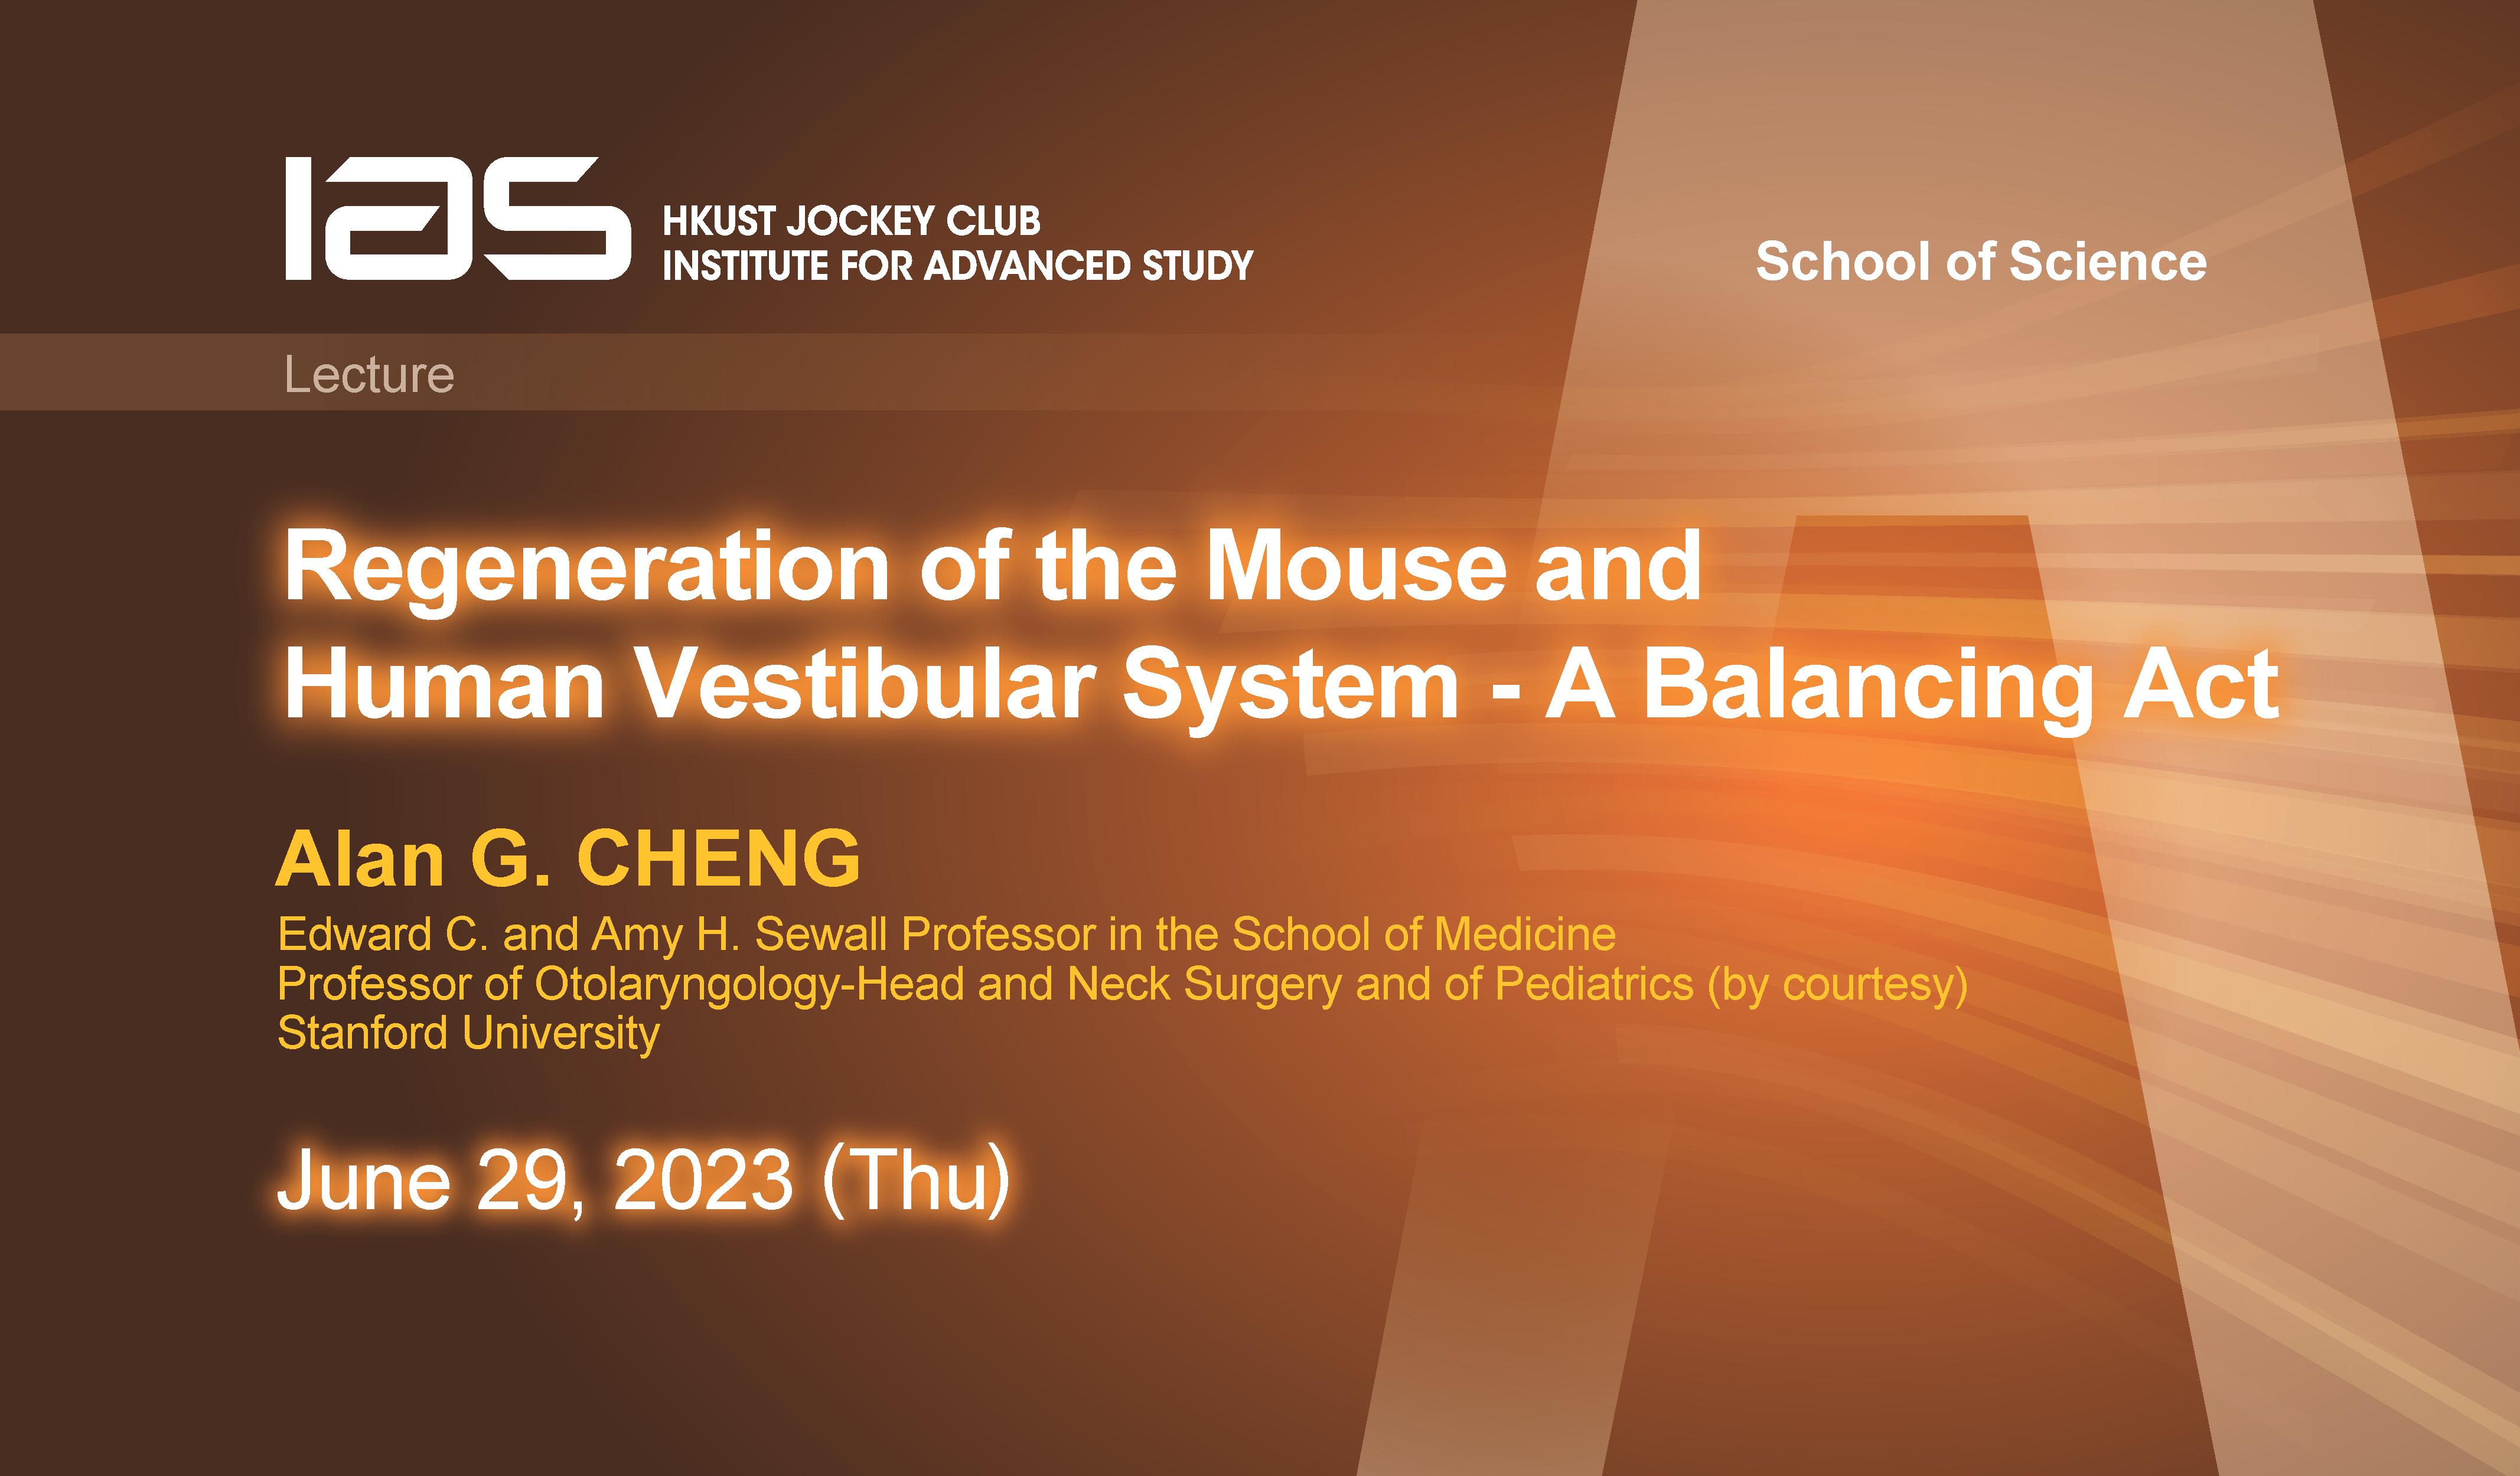 IAS / School of Science Joint Lecture - Regeneration of the Mouse and Human Vestibular System — A Balancing Act